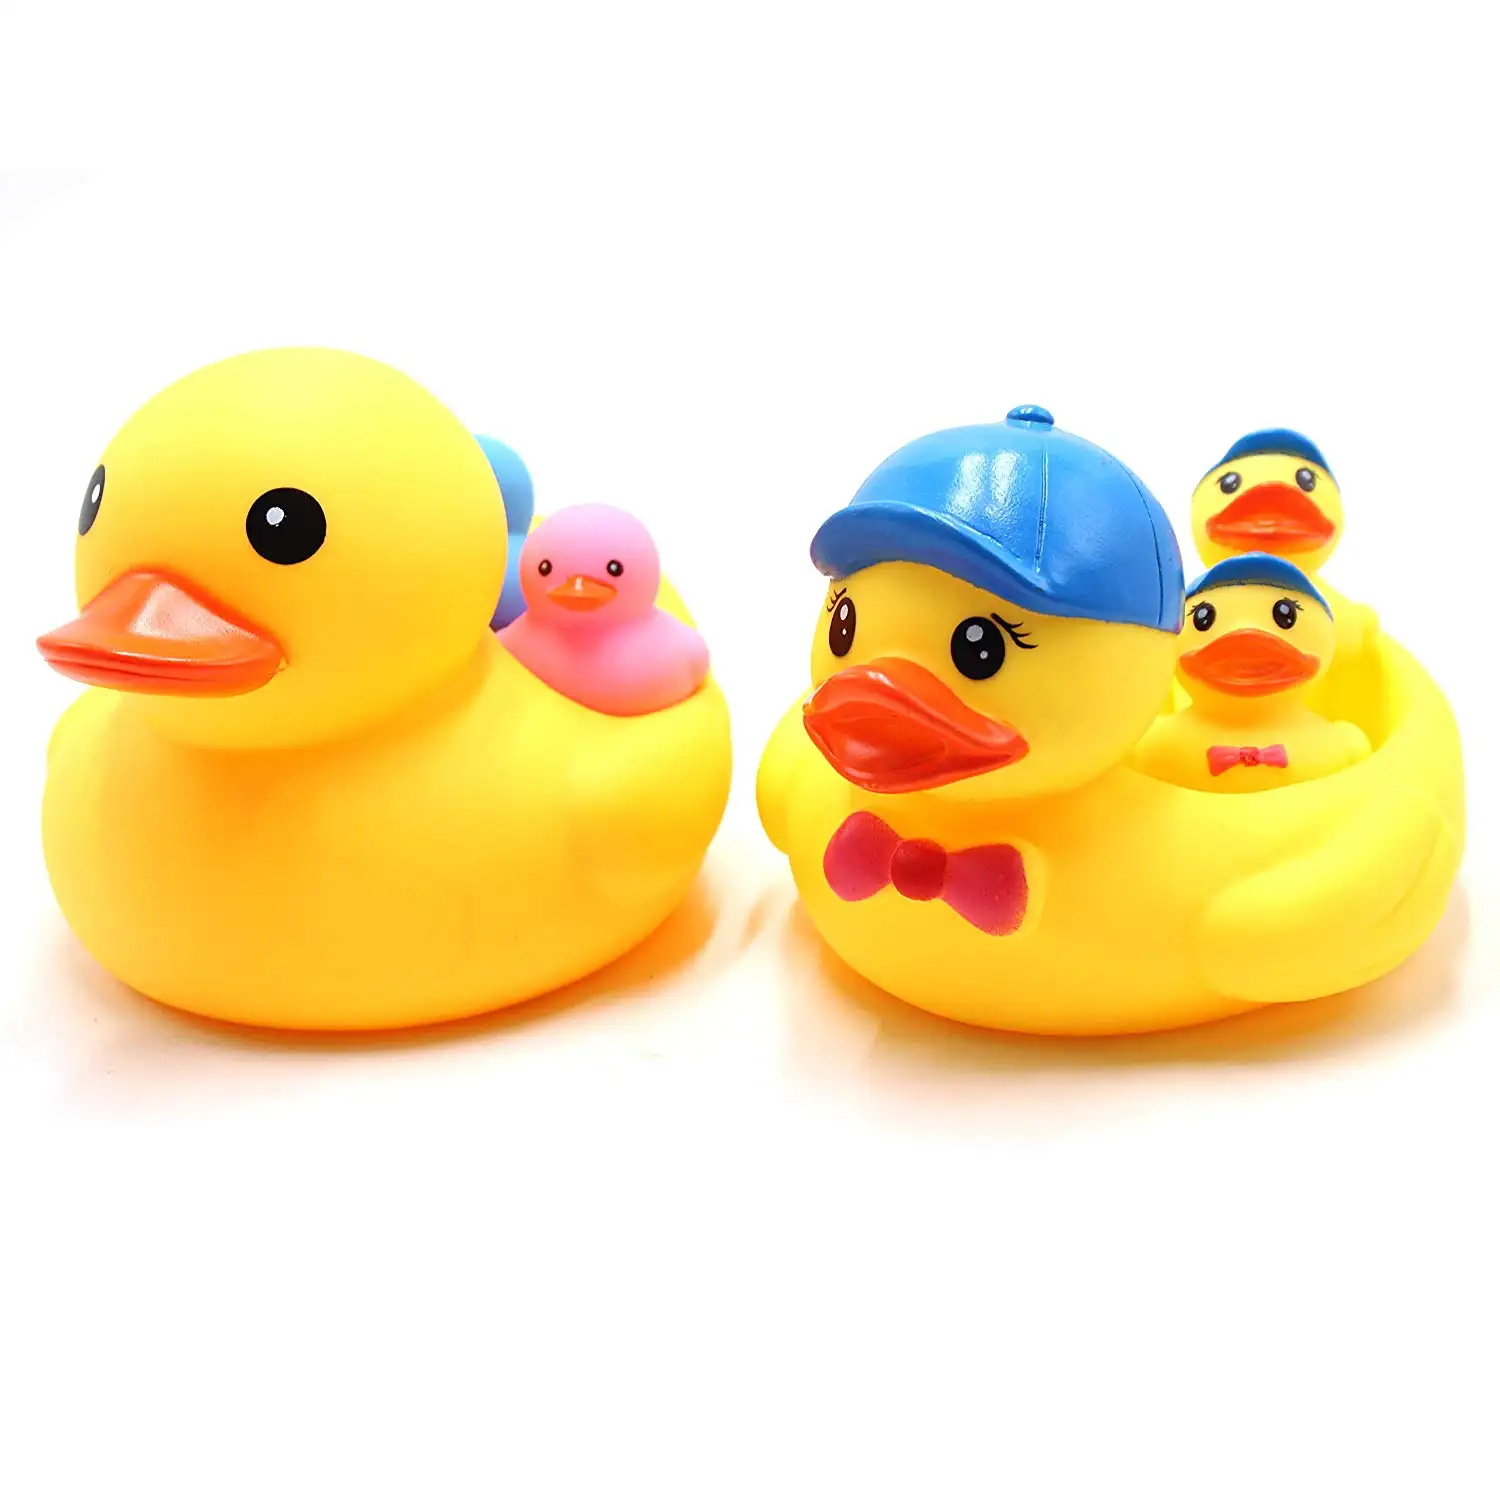 Shower Water toys Pure Natural Cute Rubber Ducky for Baby Kinder Toys